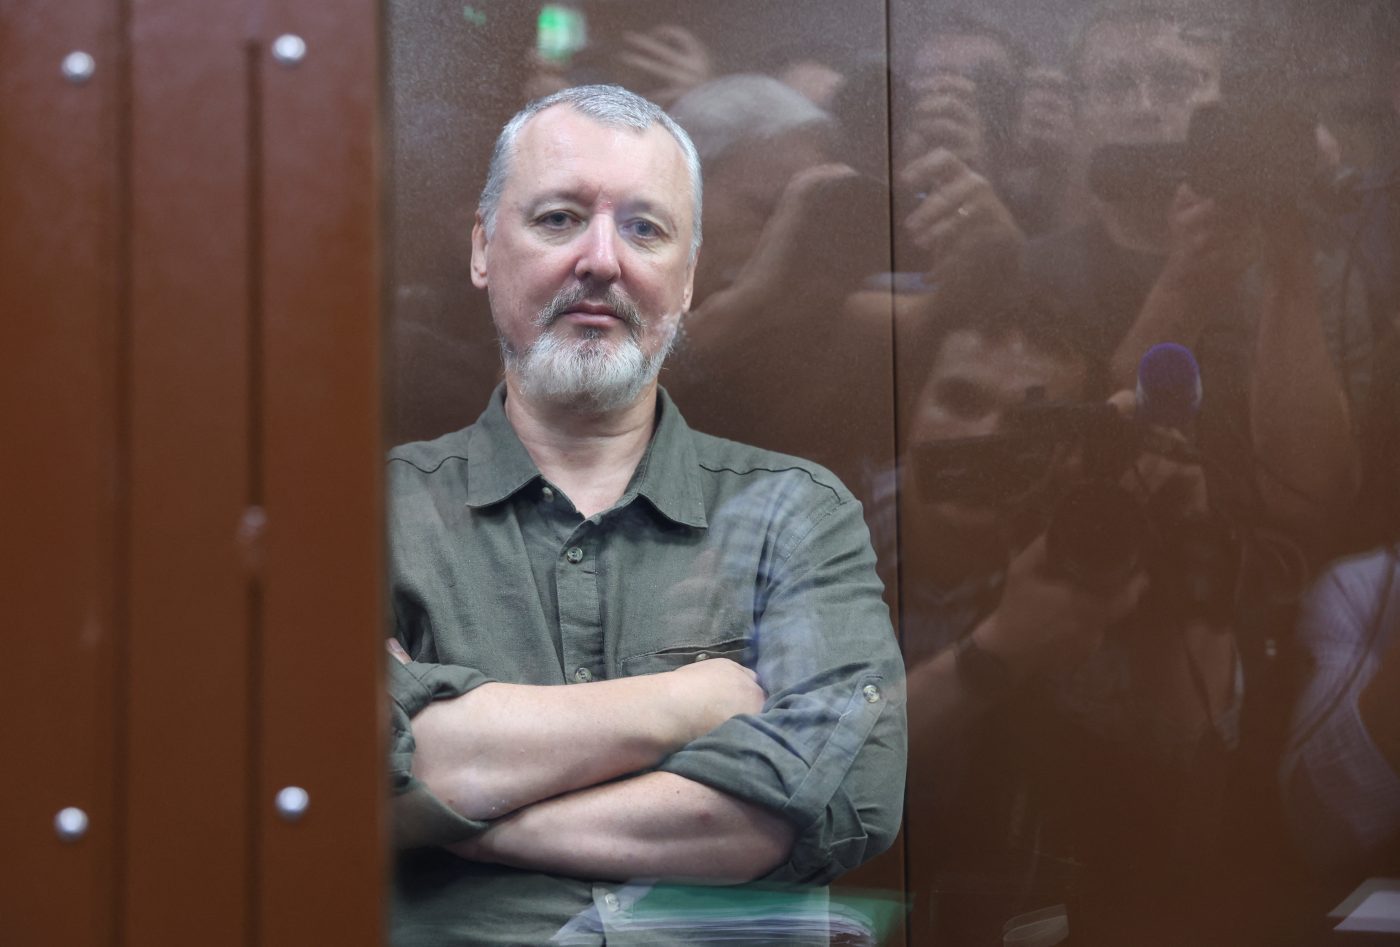 Photo: Russian nationalist Kremlin critic and former military commander Igor Girkin, also known as Igor Strelkov, who is charged with inciting extremist activity, sits behind a glass wall of an enclosure for defendants before a court hearing in Moscow, Russia, July 21, 2023. Credit: REUTERS/Yulia Morozova